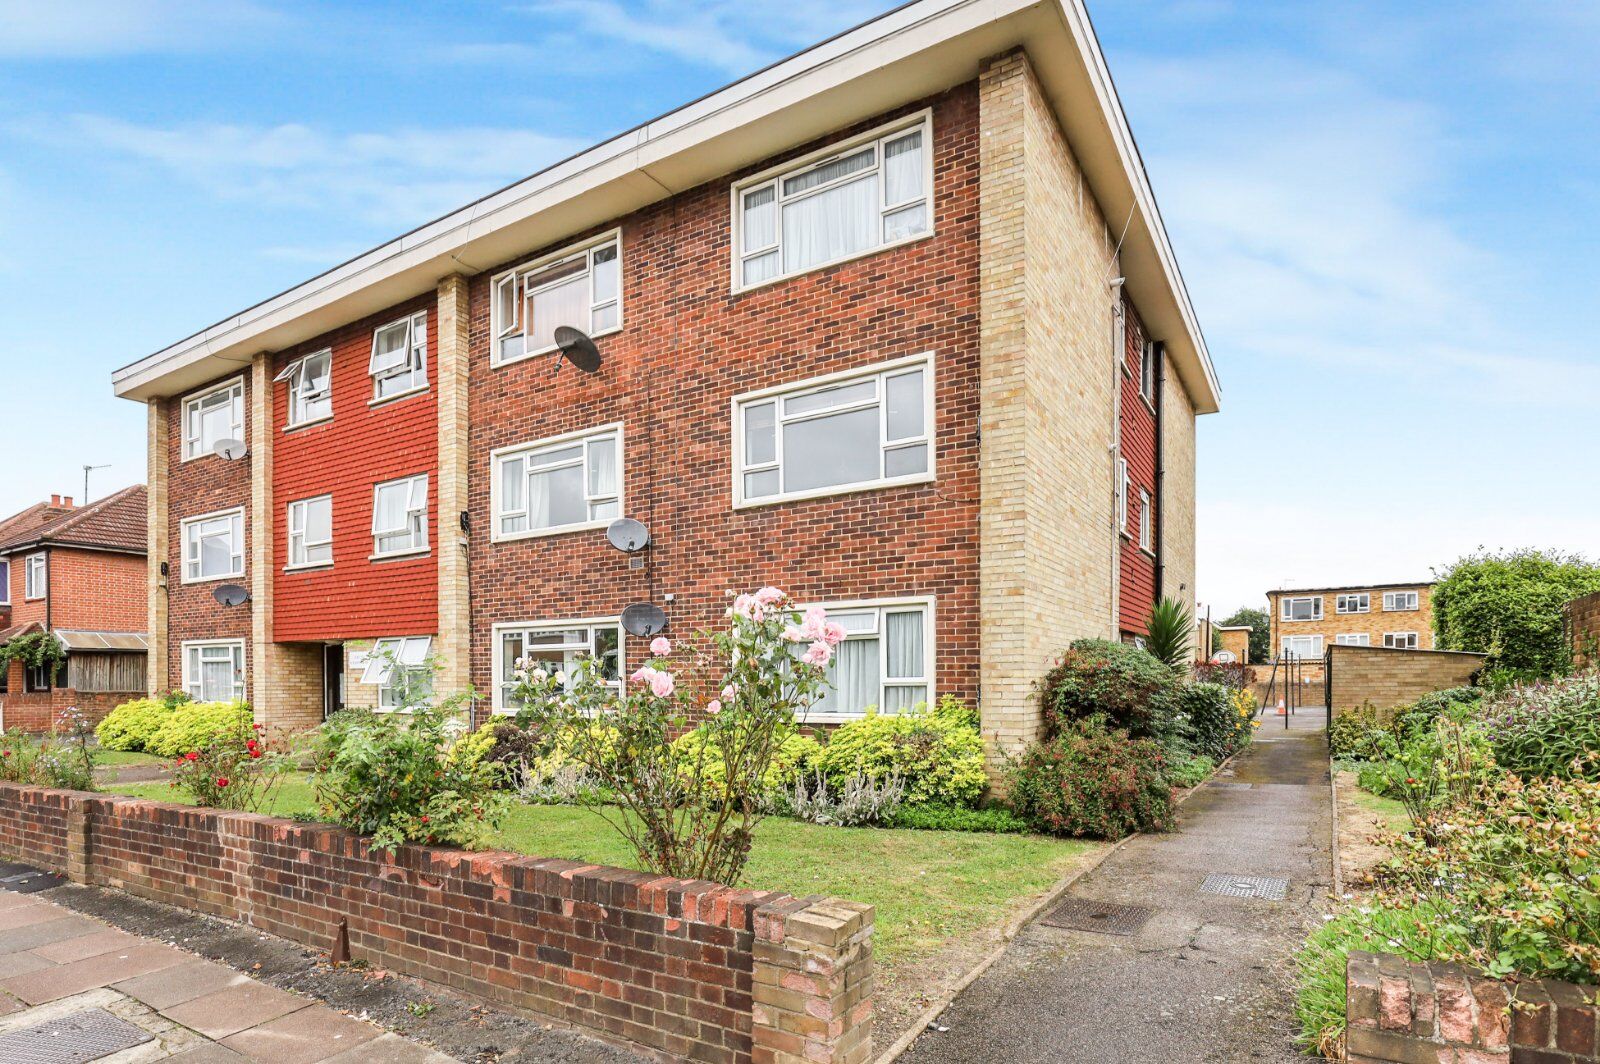 2 bedroom  flat for sale South Park Road, Wimbledon, SW19, main image